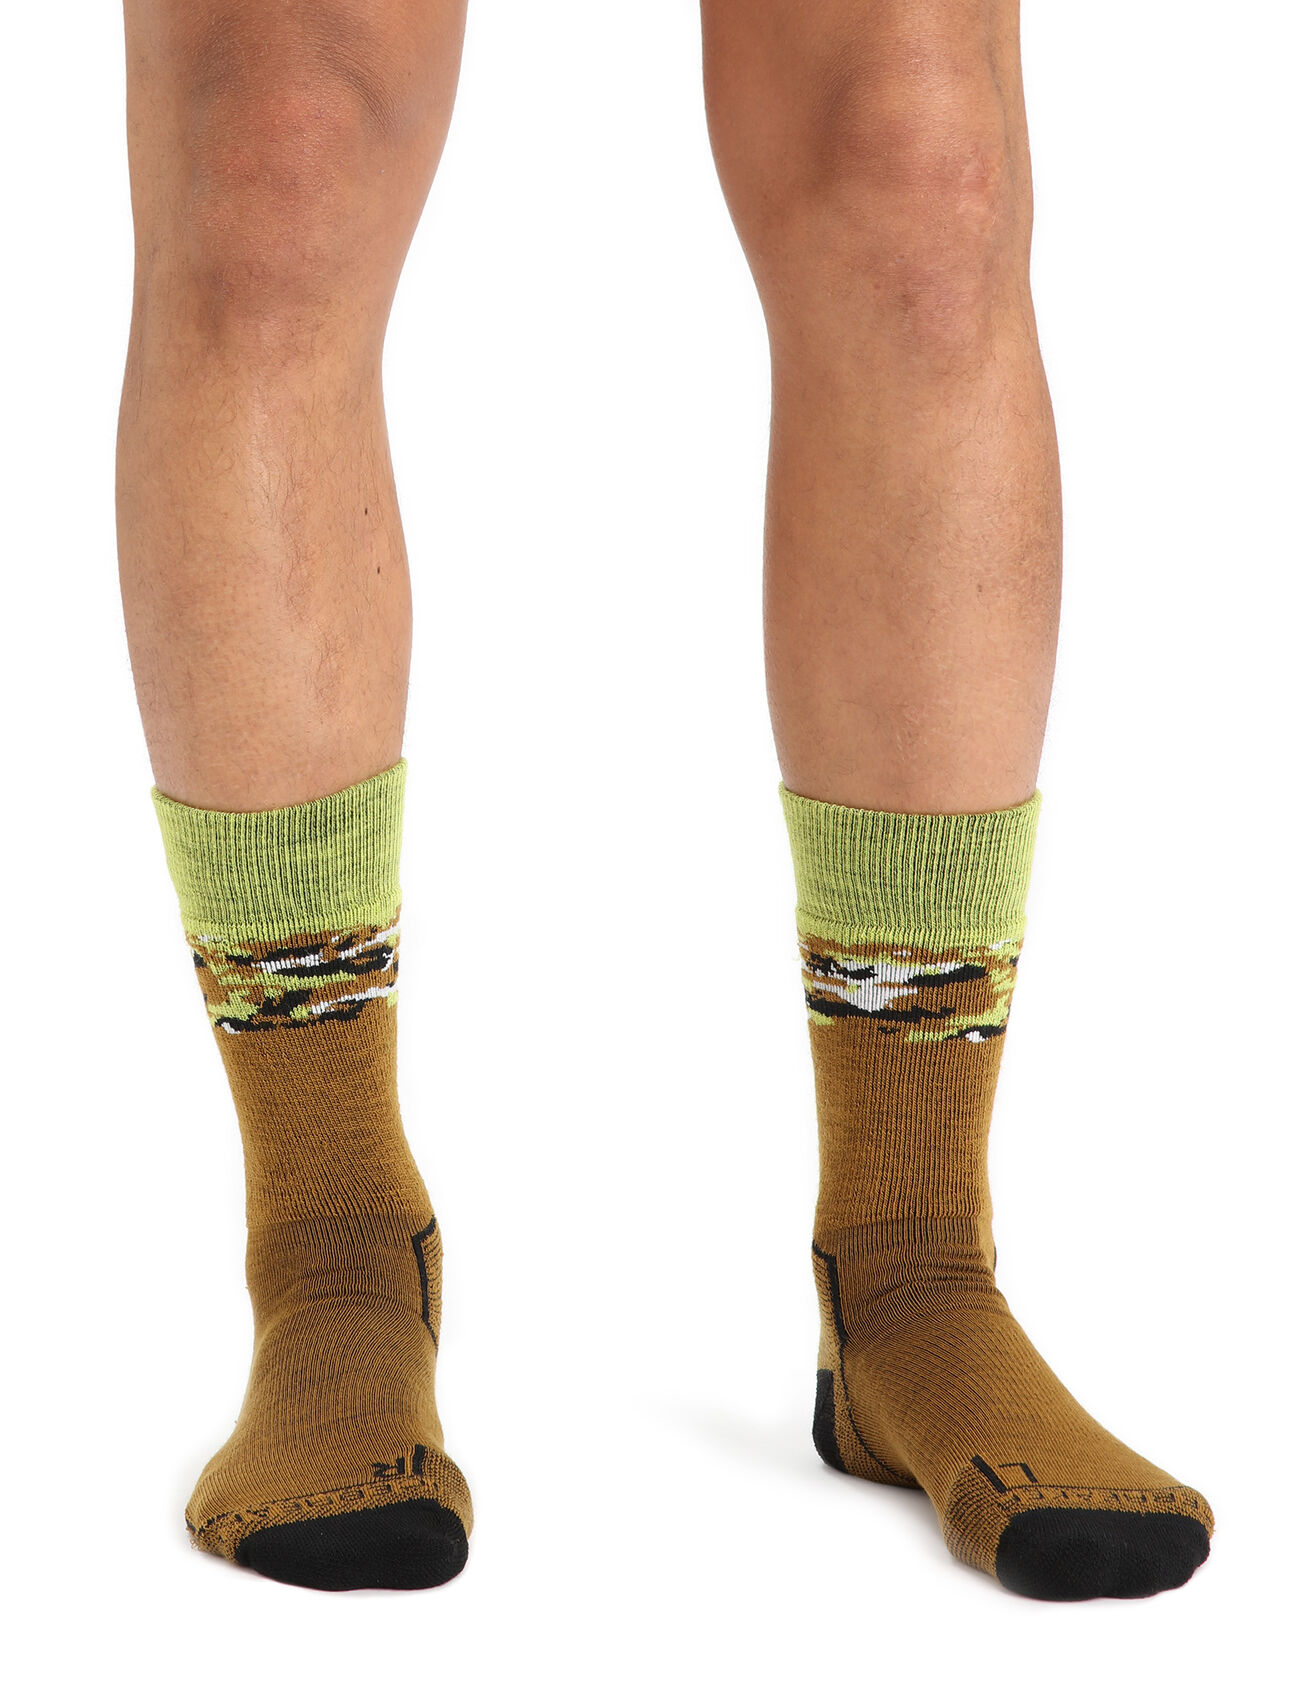 Mens Merino Hike+ Medium Crew Socks Sedimentary Durable, crew-length merino wool socks that are stretchy, breathable, and naturally odor-resistant with full cushion, the Hike+ Medium Crew Sedimentary socks feature an anatomical sculpted design for day hikes and backpacking trips.